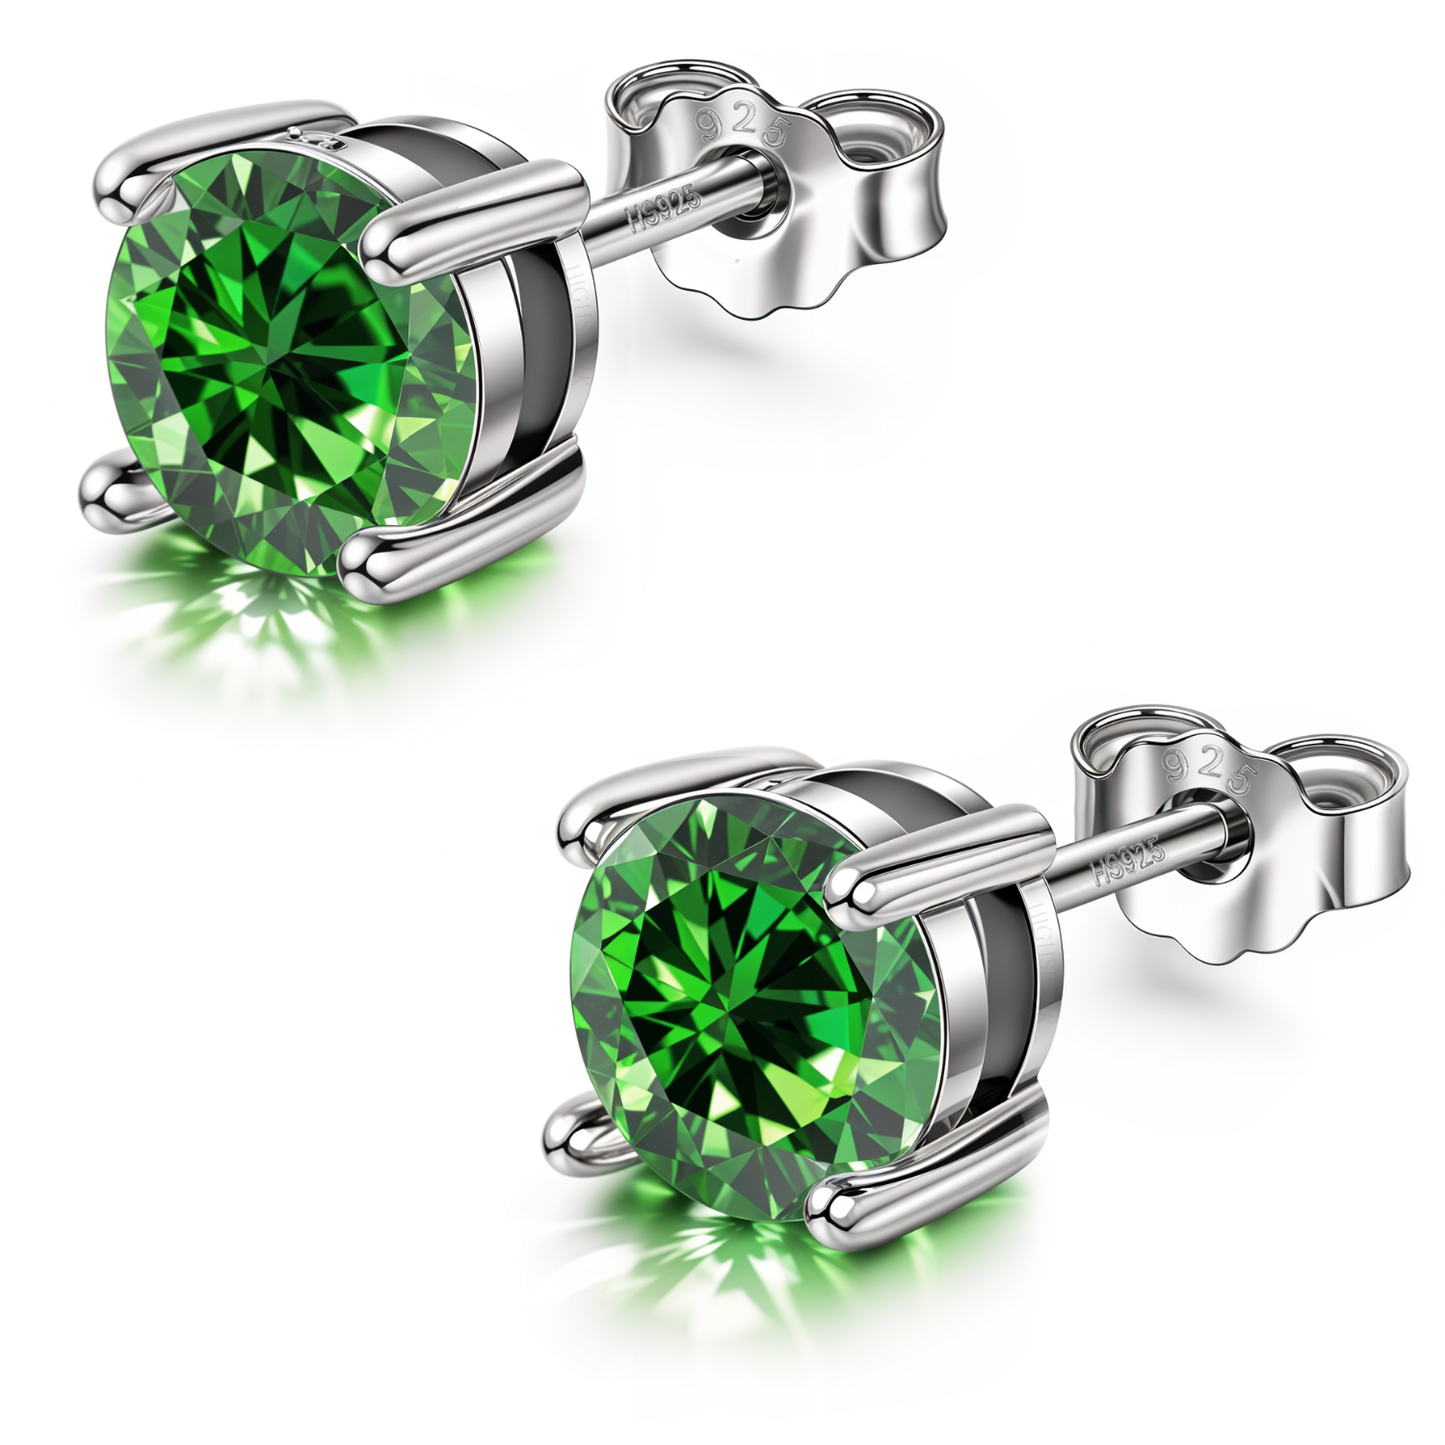 Women's Solitaire Birthstone Earrings - 925 Silver - May Emerald Sparkling Zirconia